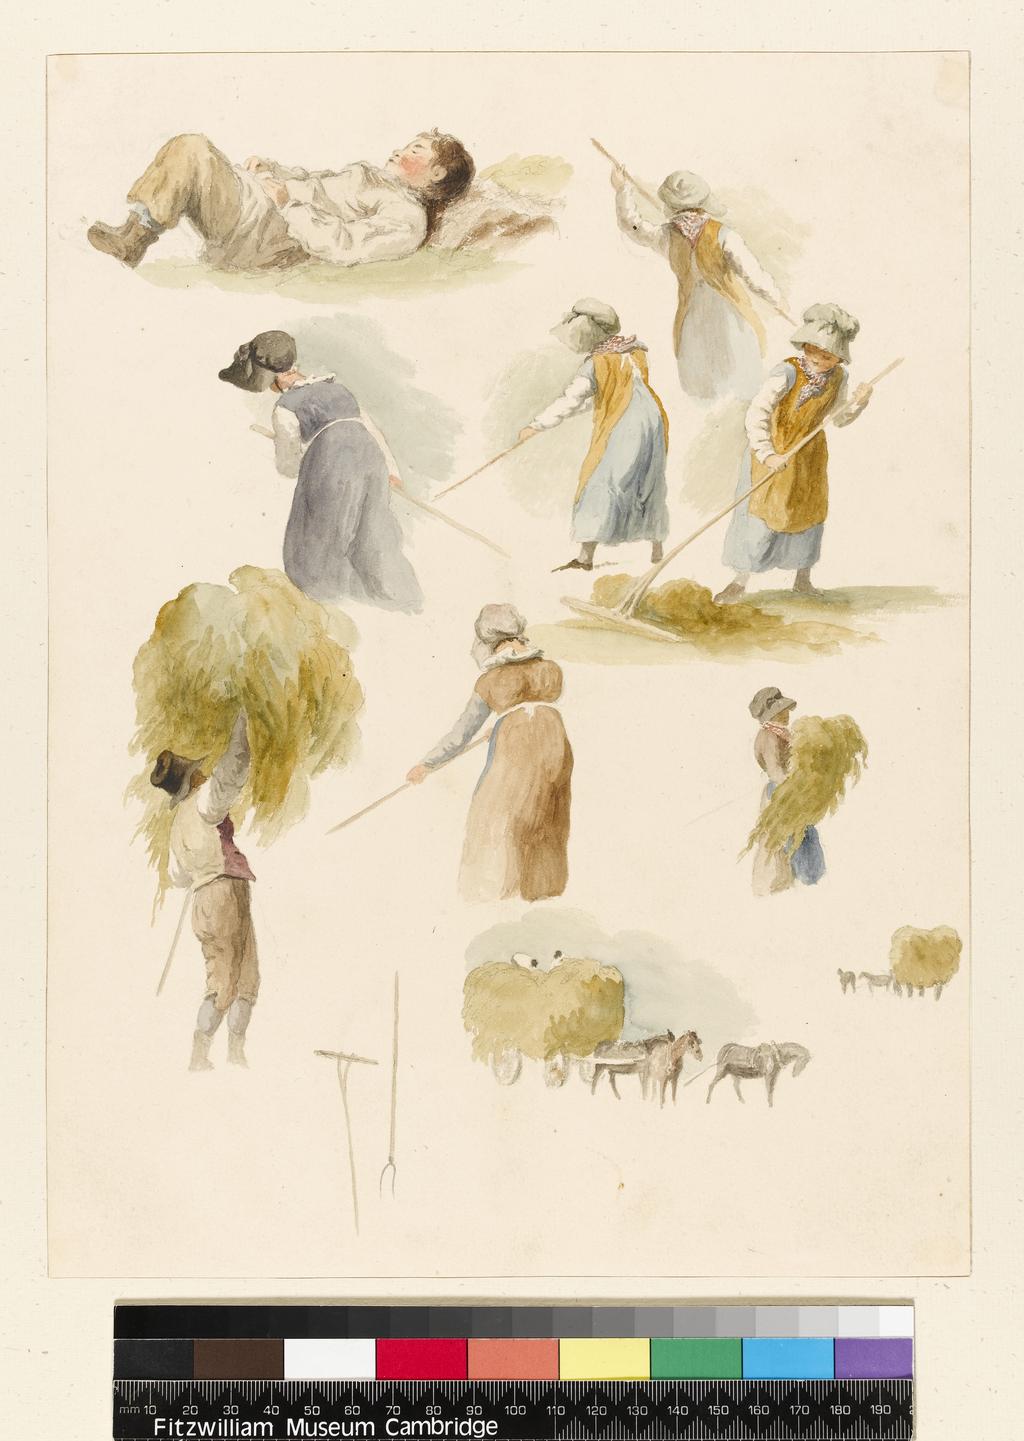 An image of Title/s: Studies of children haymaking Maker/s: Hills, Robert (draughtsman) [ULAN info: British artist, 1769-1844]Technique Description: graphite and watercolour on paper Dimensions: height: 303 mm, width: 228 mm